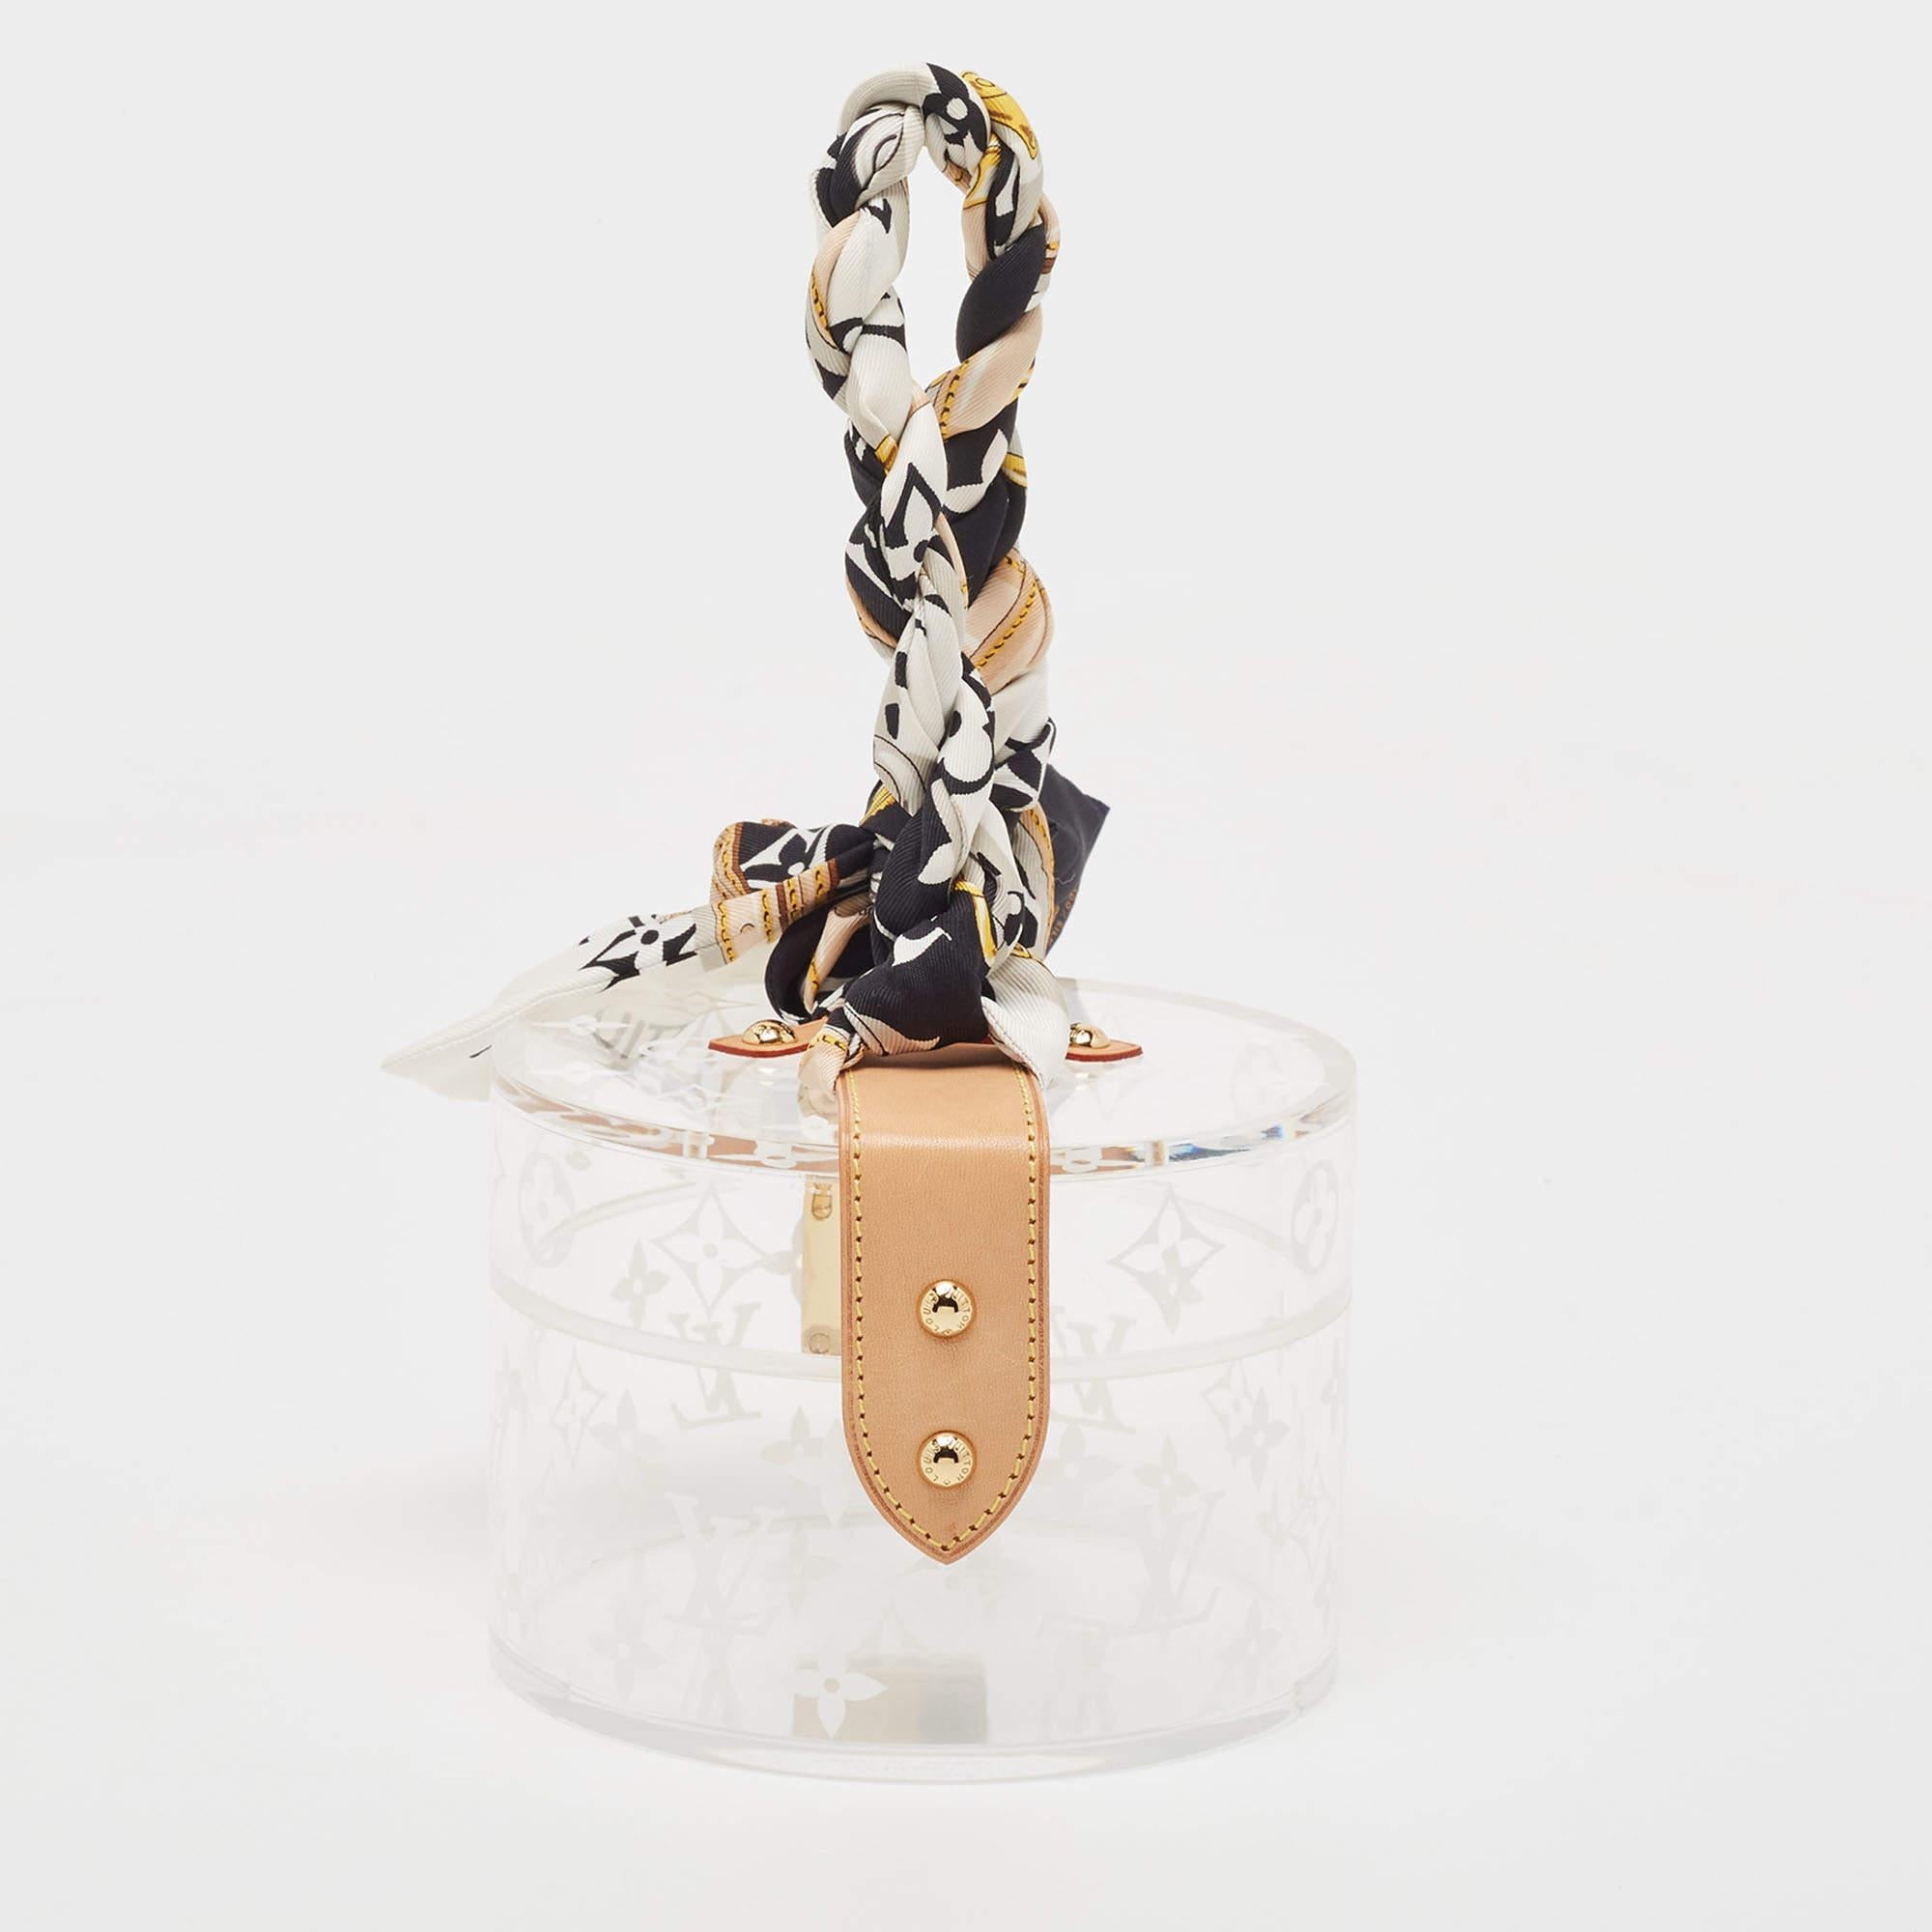 The Box Scott by Louis Vuitton is crafted using the label’s signature Monogram plexiglass. It features a rounded silhouette, front S-lock, and leather trim. Make it part of your dressing table, or choose it as a gift as it also comes with a twilly.

